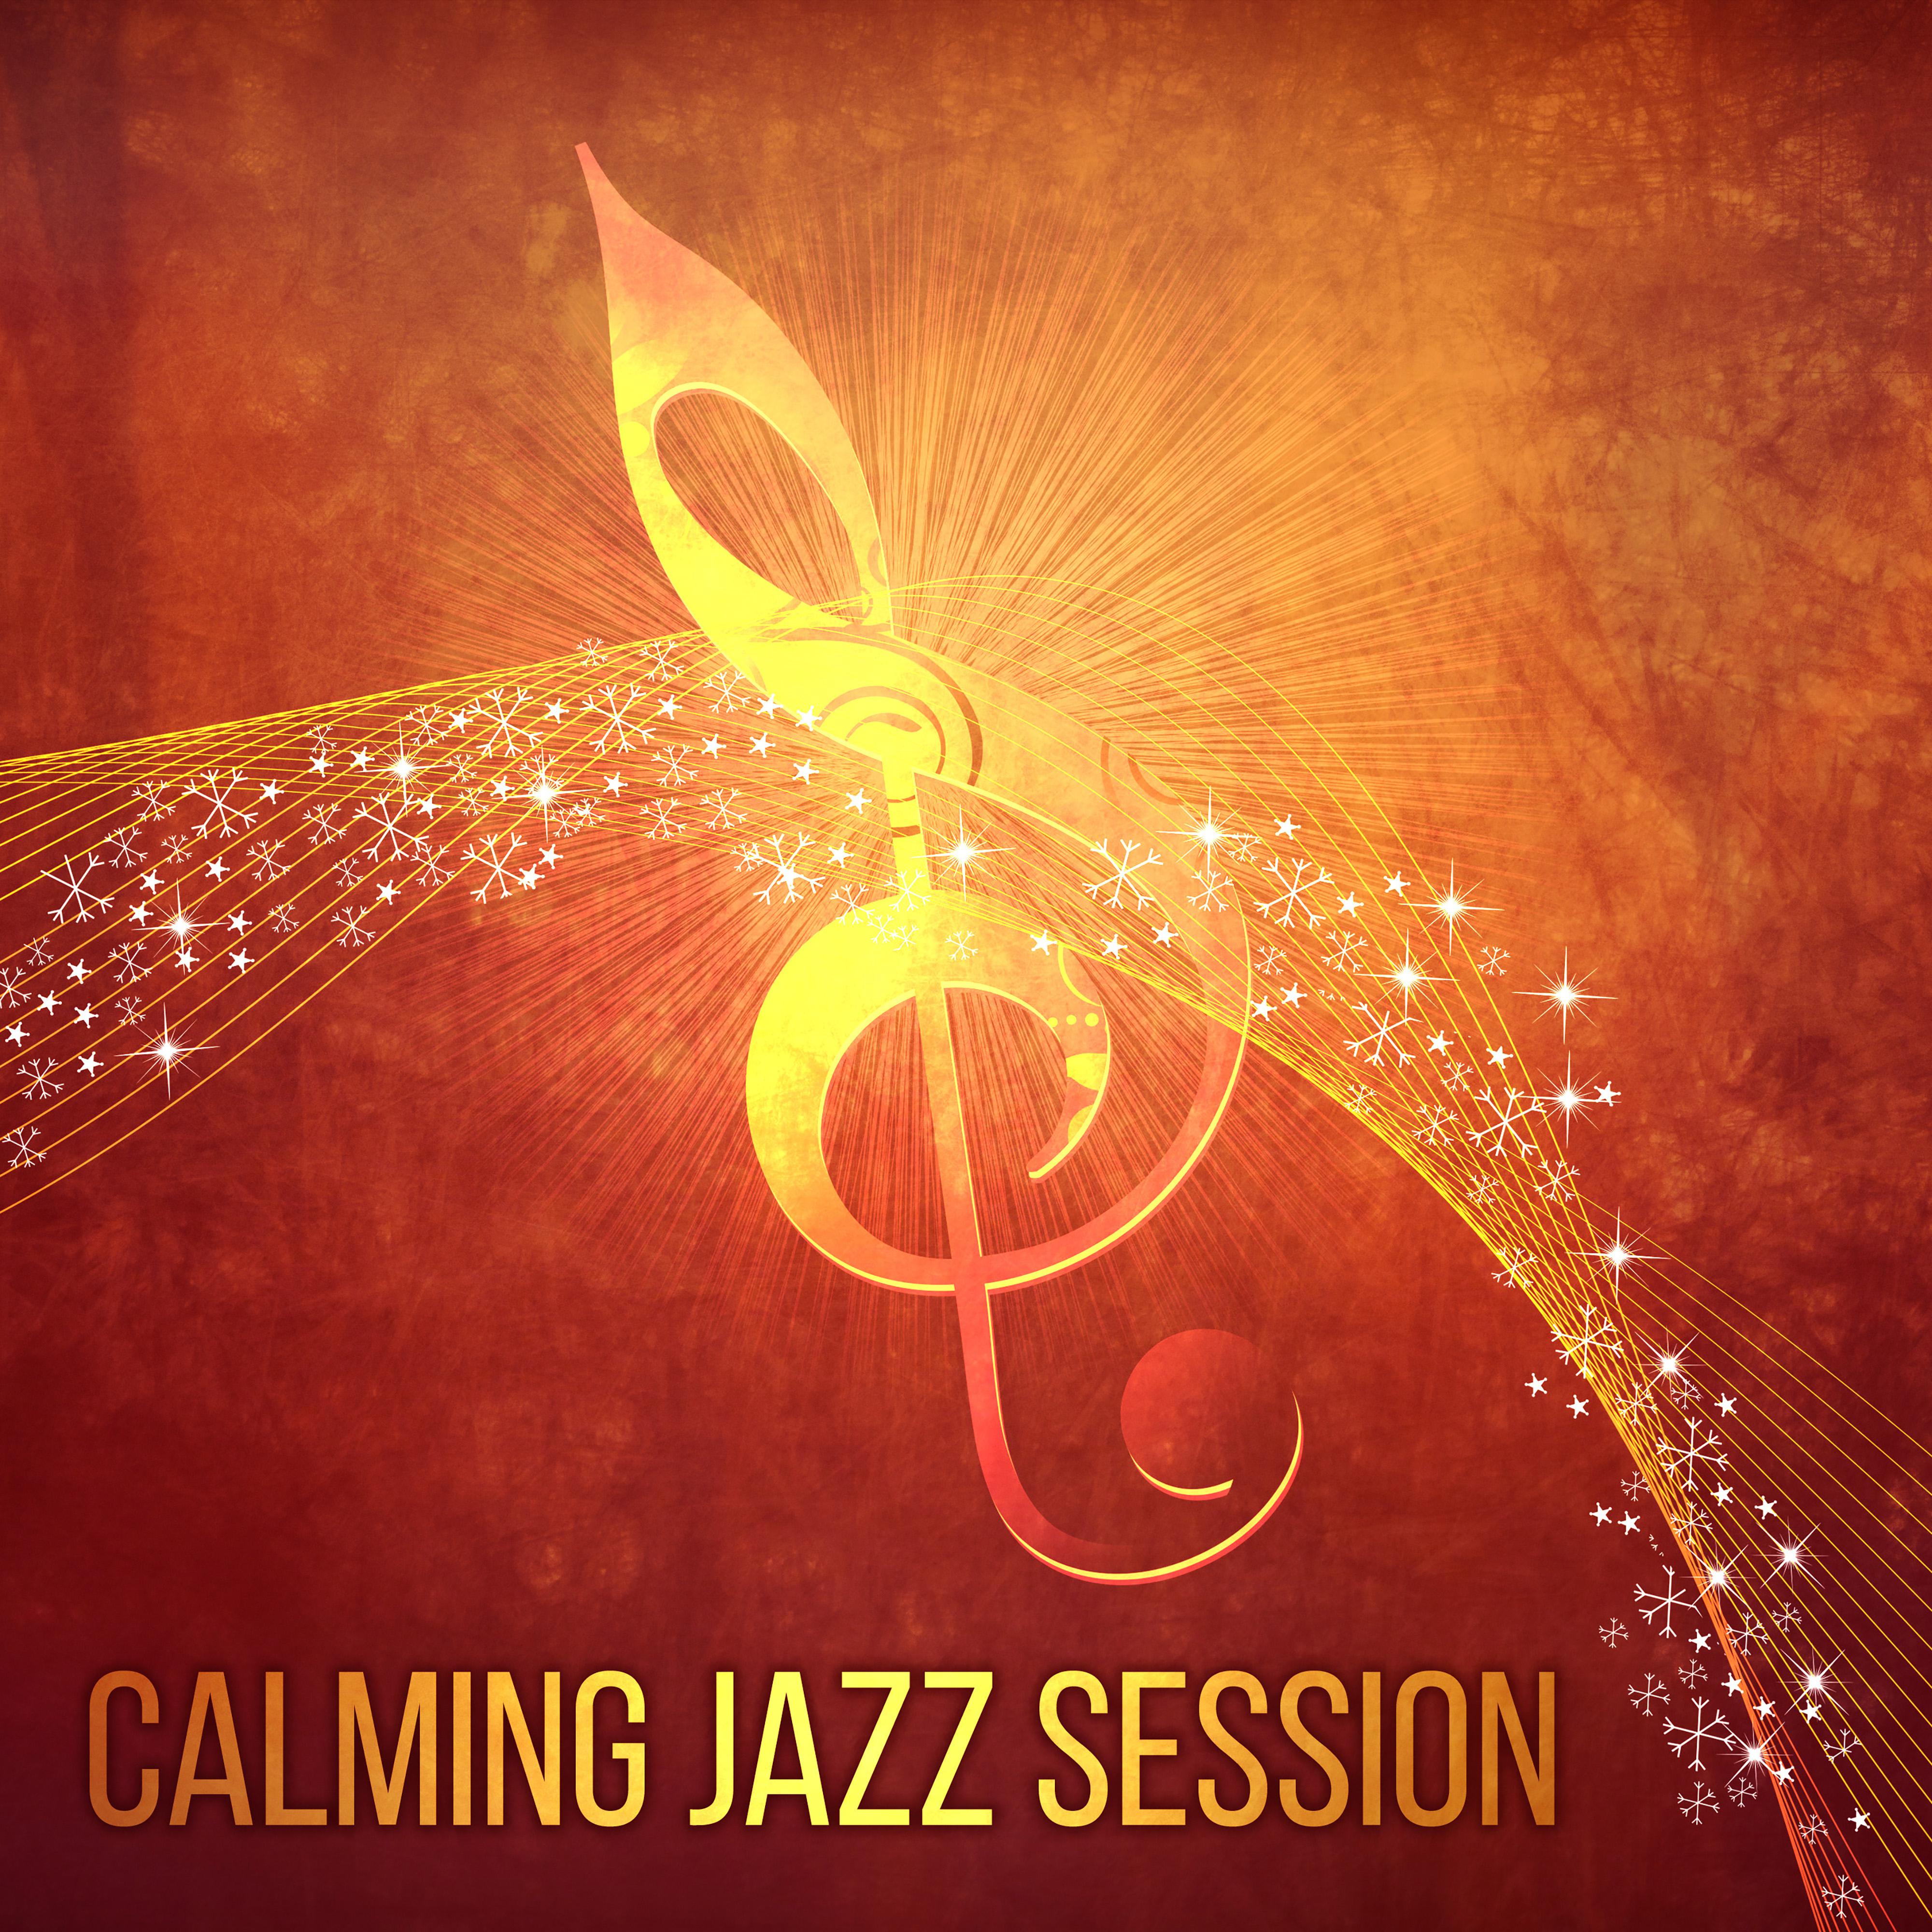 Calming Jazz Session  Instrumental Music for Relax, Mellow Jazz Sounds, Music for Restaurant, Serenity Tracks